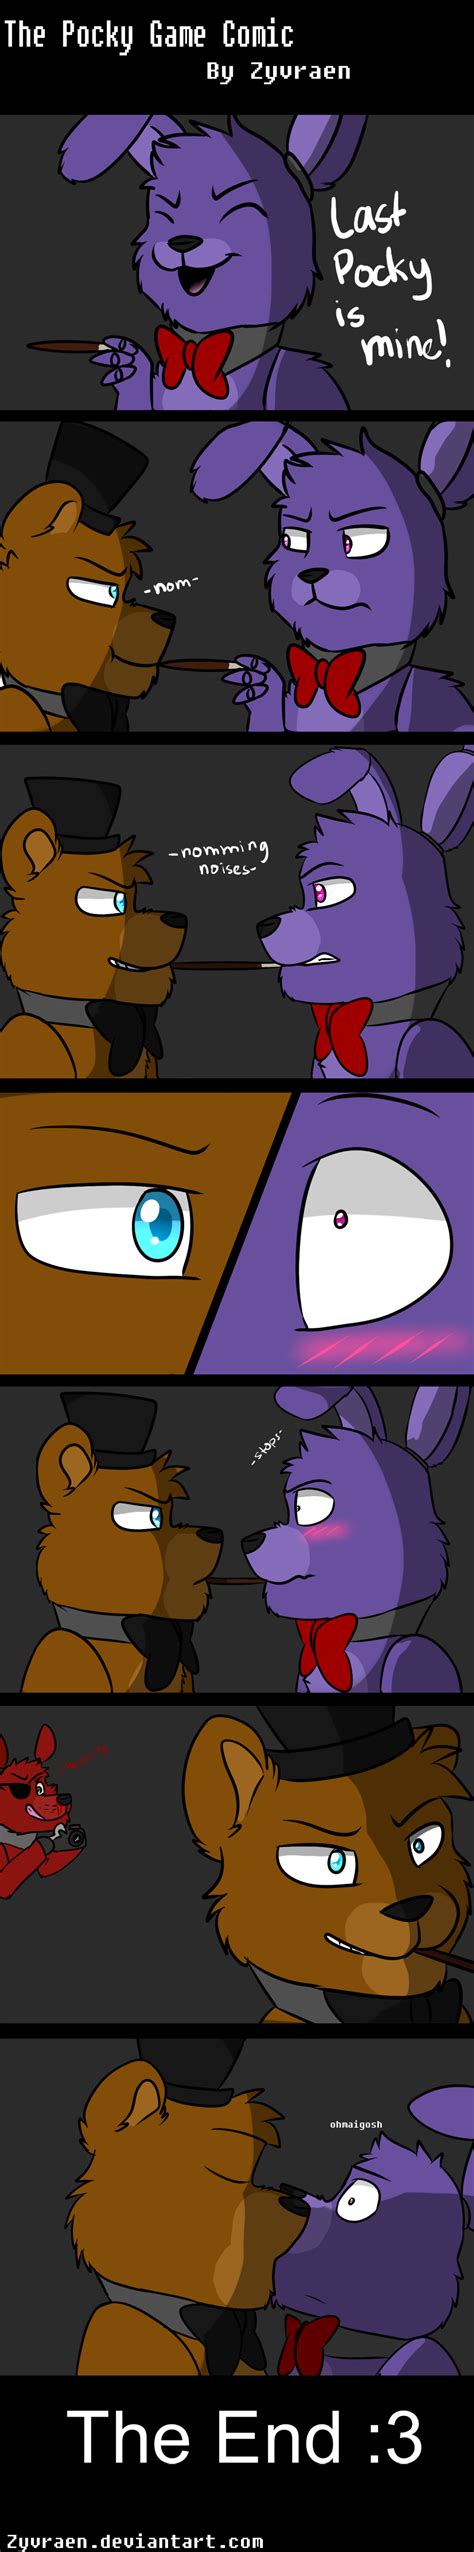 fronnie comic on deviantart pinning for foxy with a